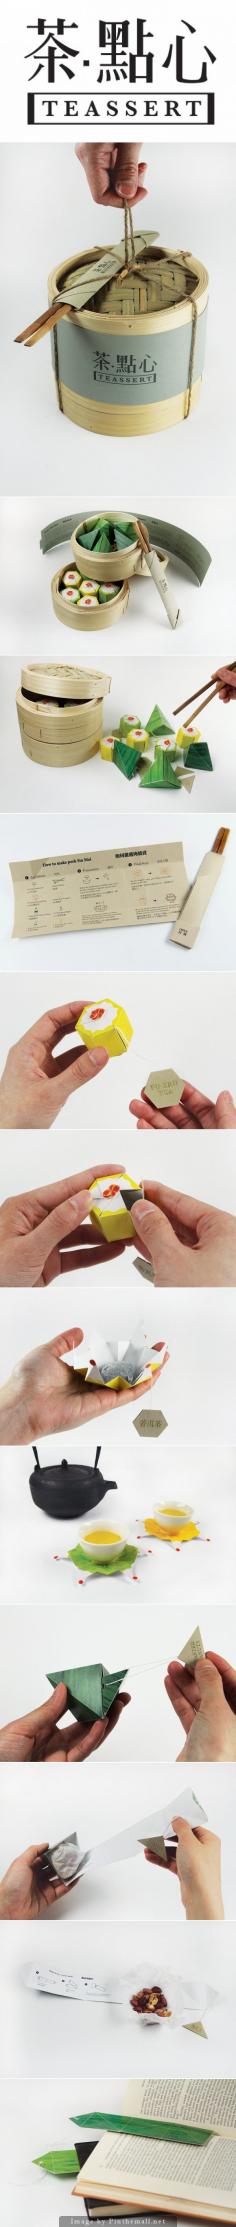 Too pretty not to share the entire Teassert #packaging pin PD - created via www.behance.net/...